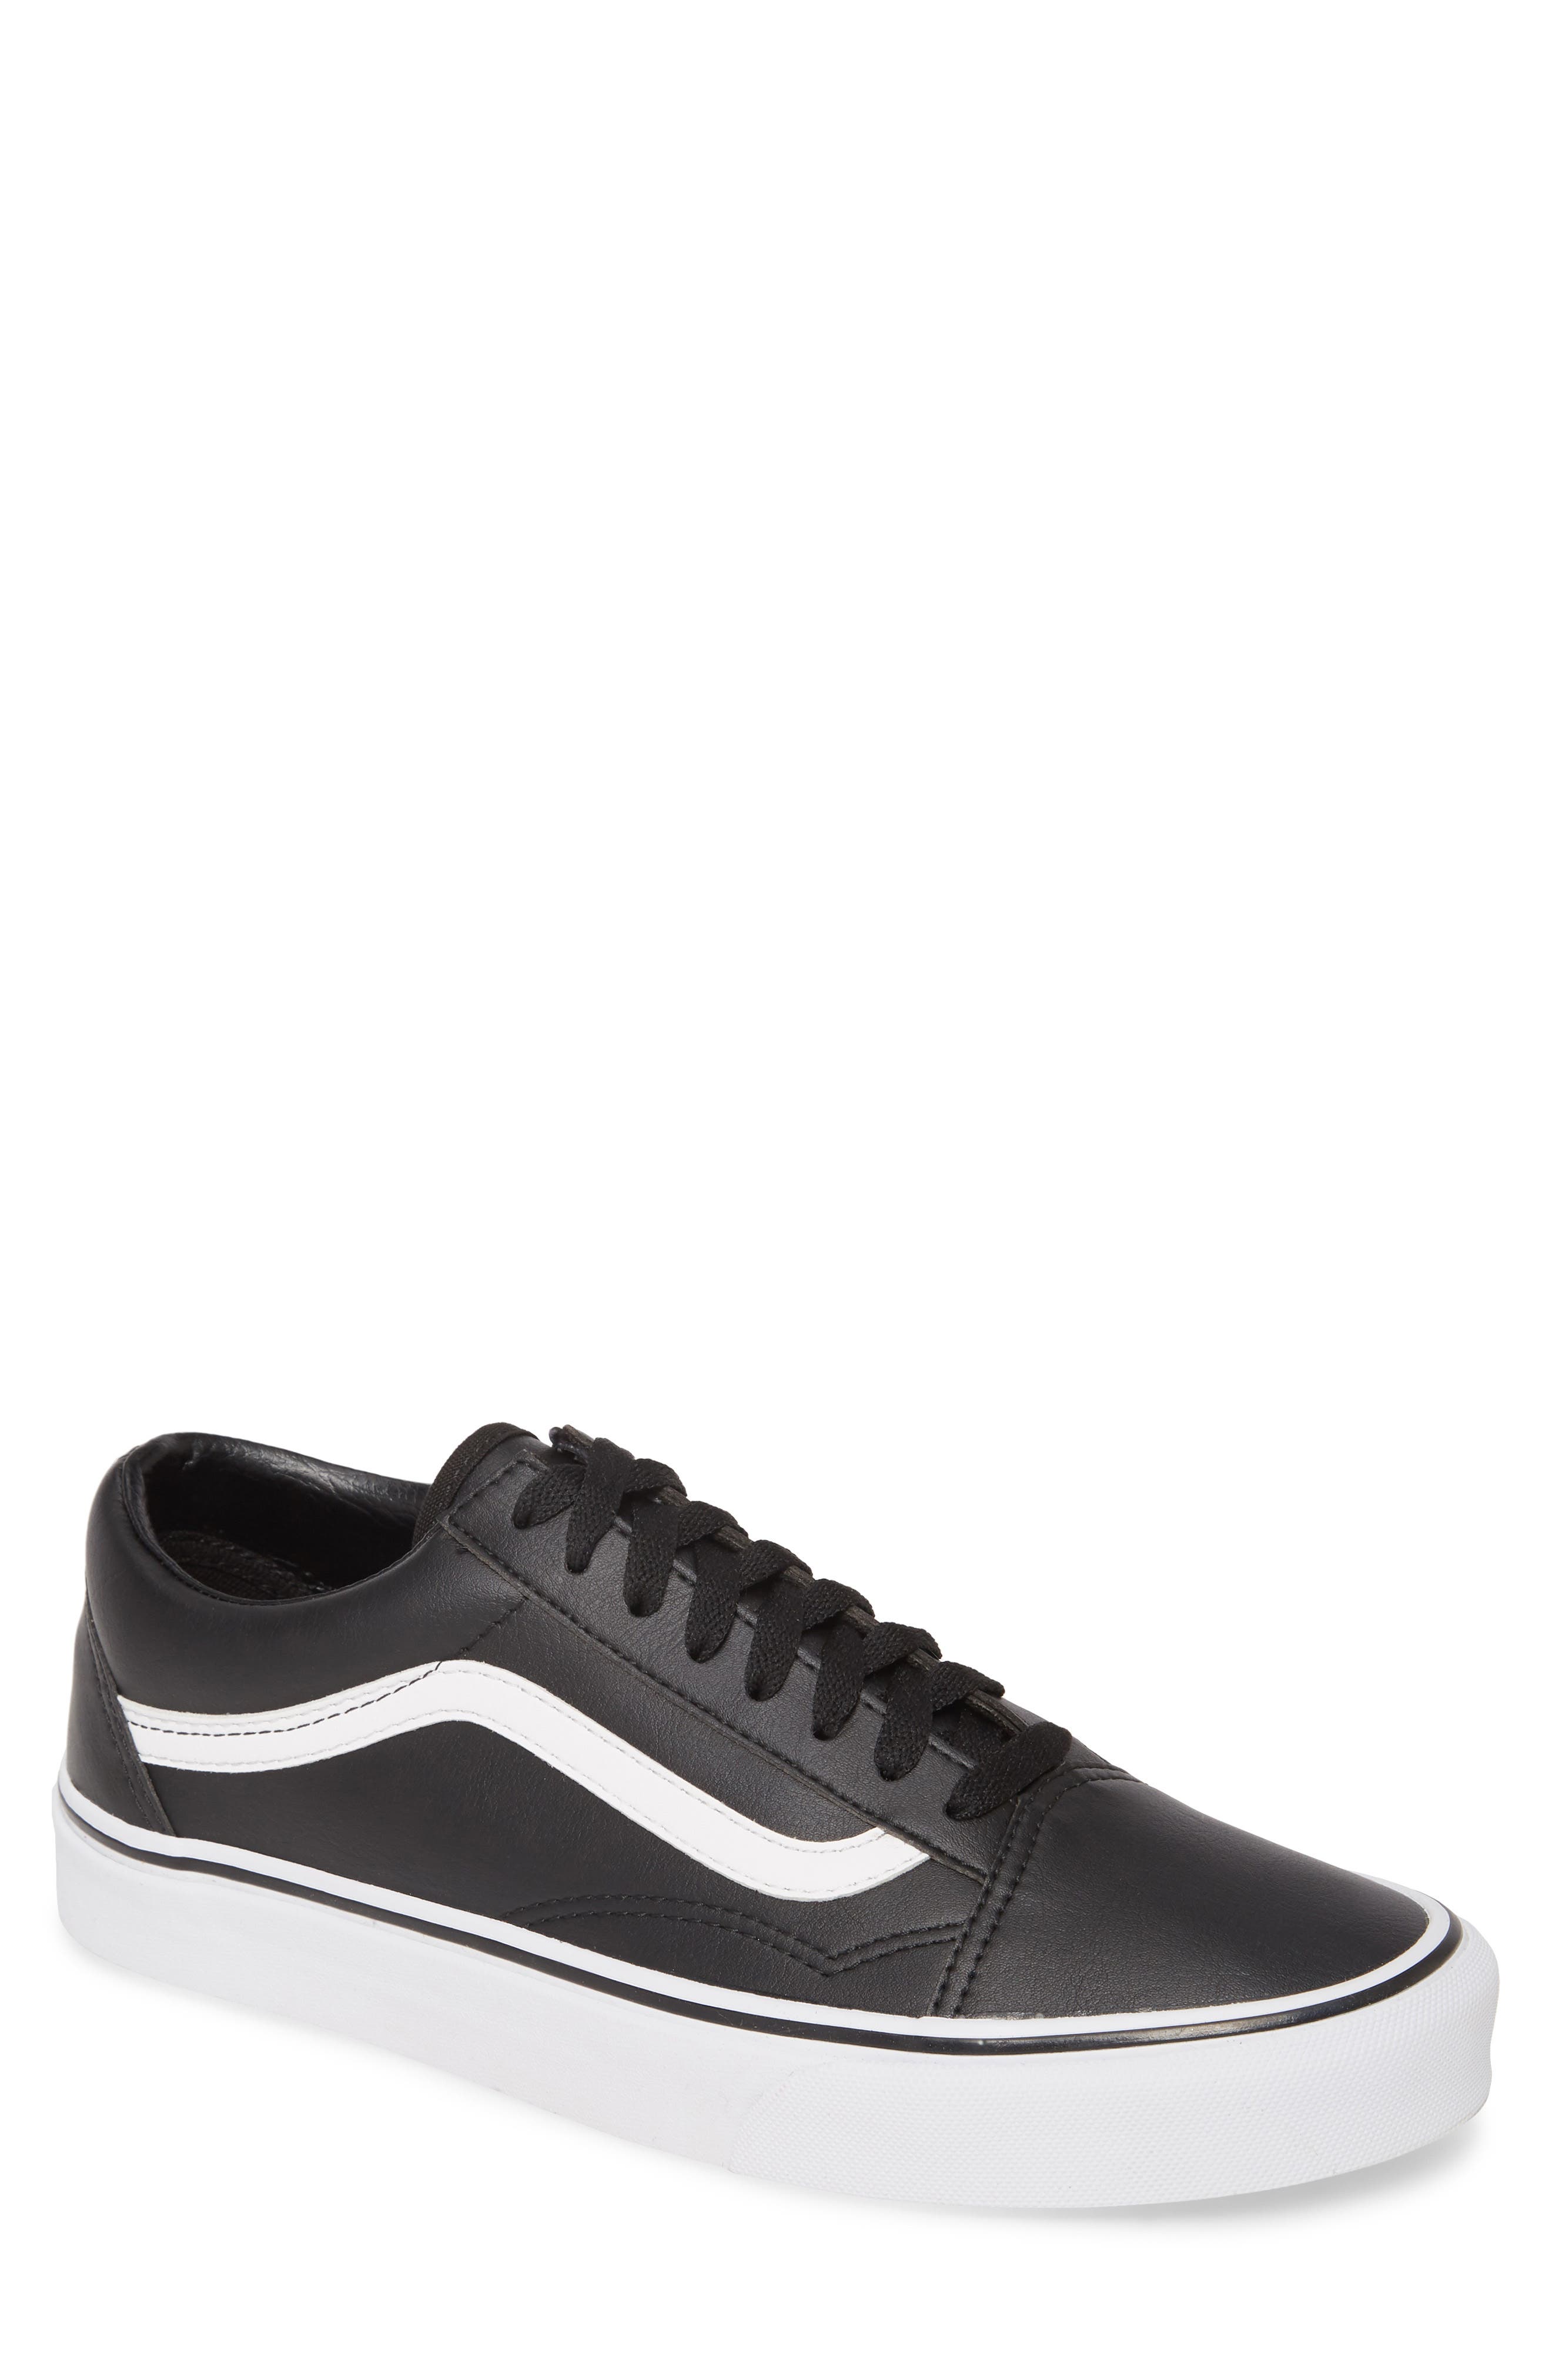 Vans Old Skool Classic Faux Leather 